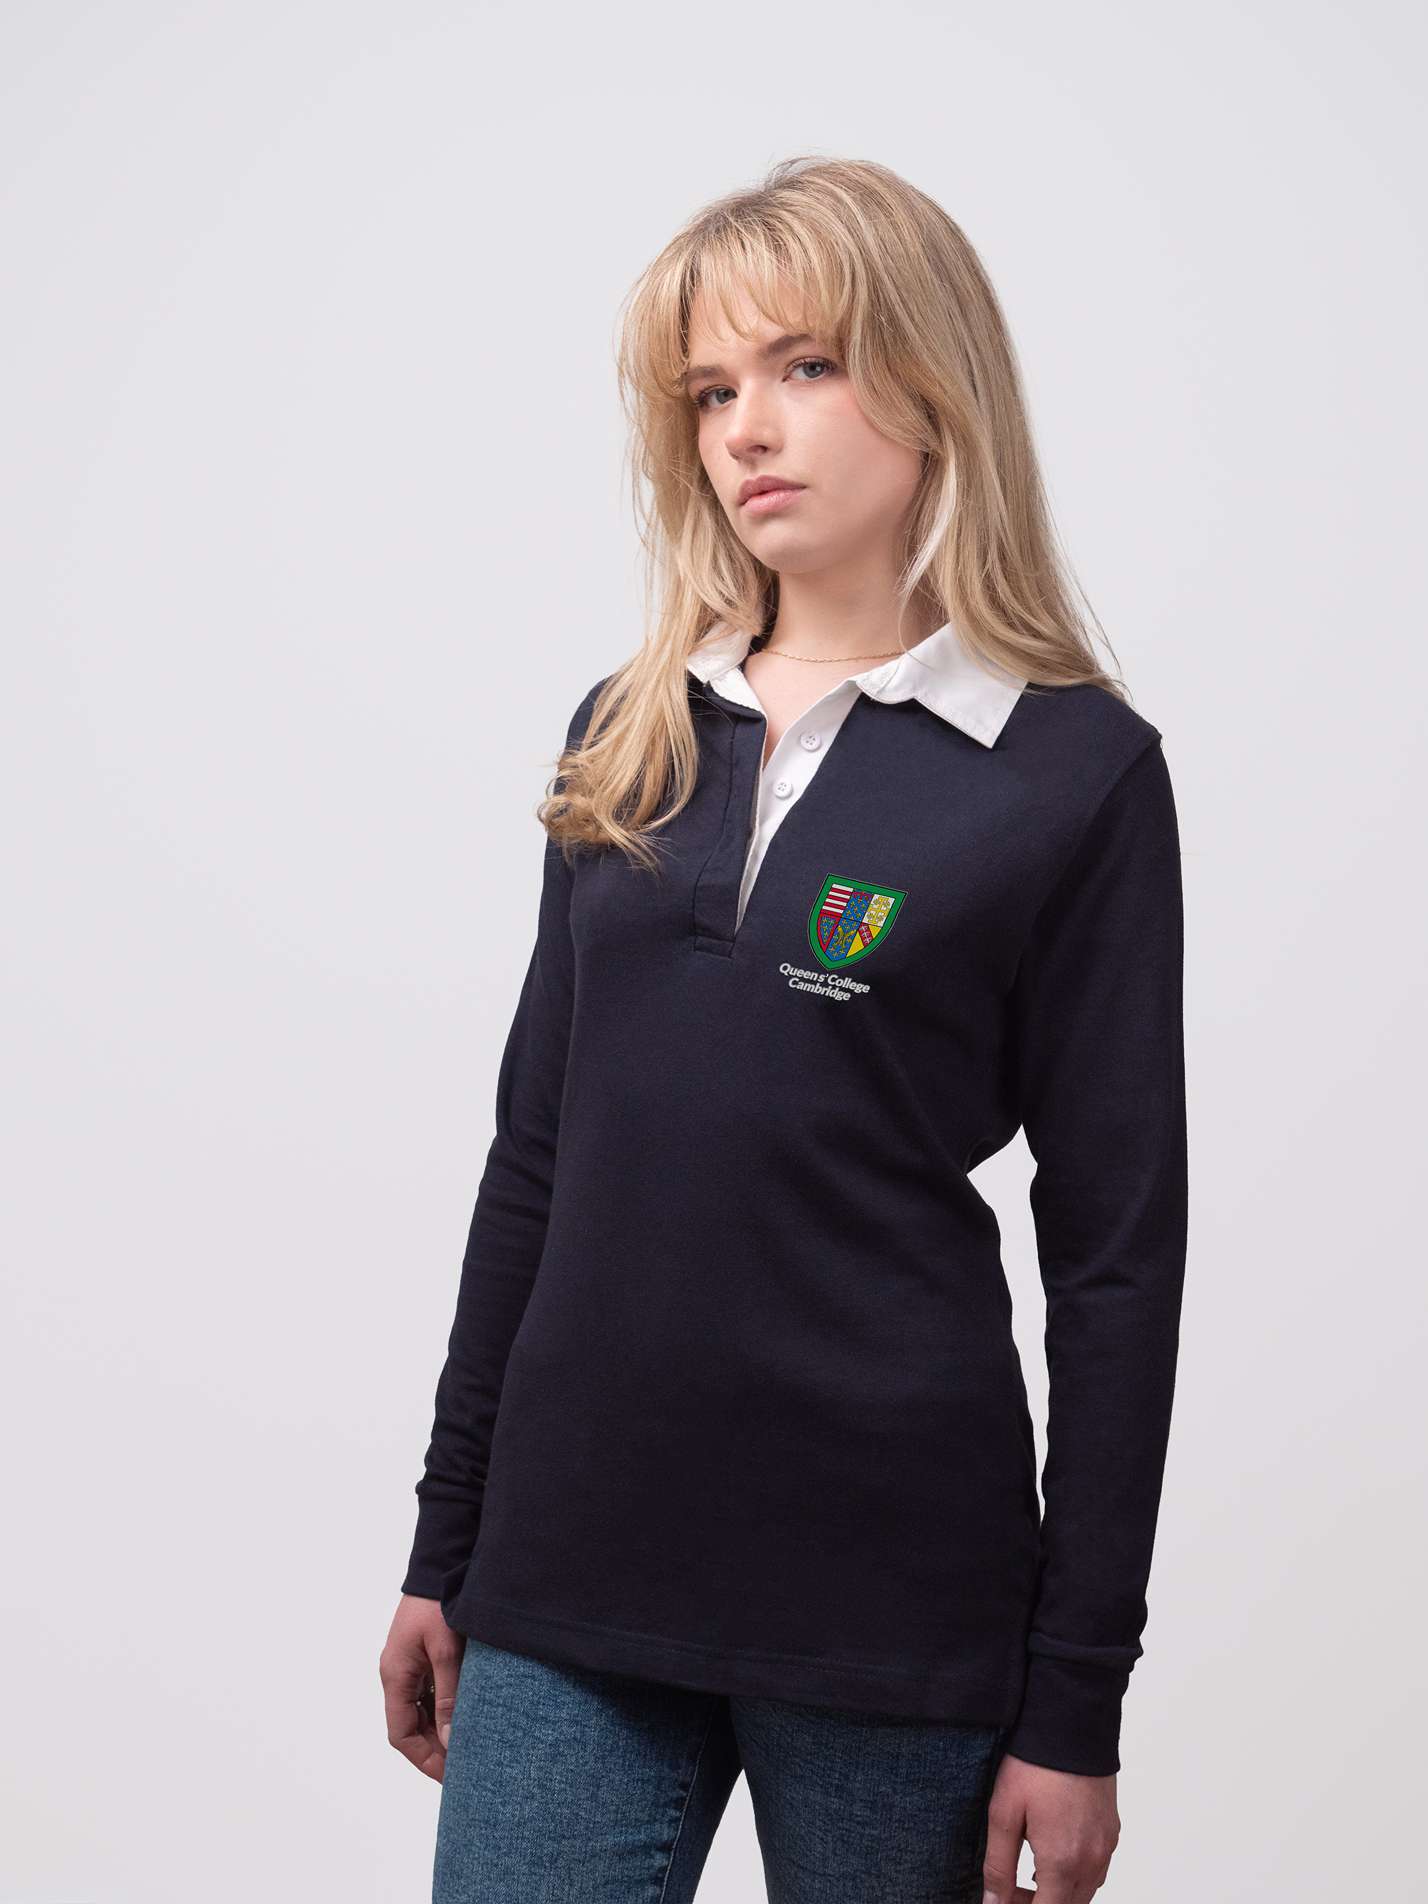 Student wearing a navy Queens' College rugby shirt with embroidered crest